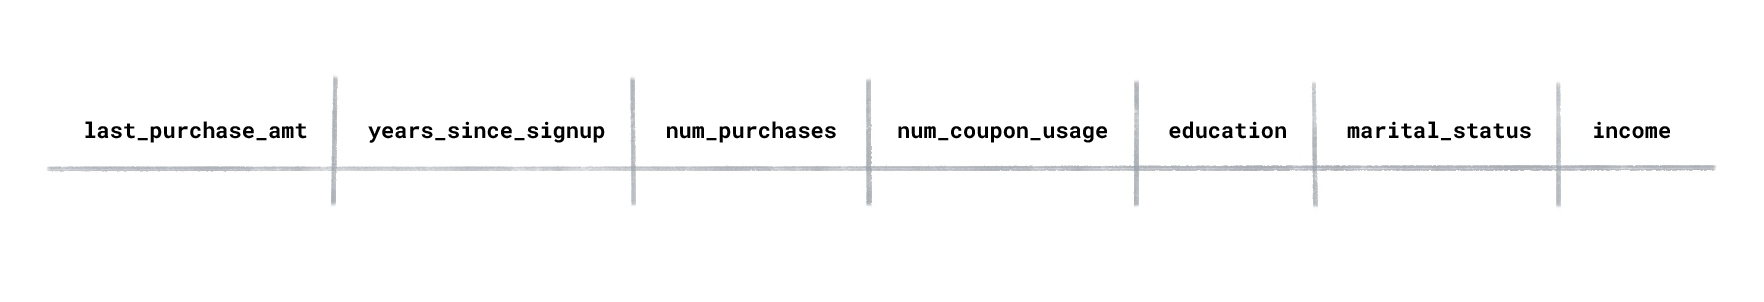 An image of an row of customer attributes.